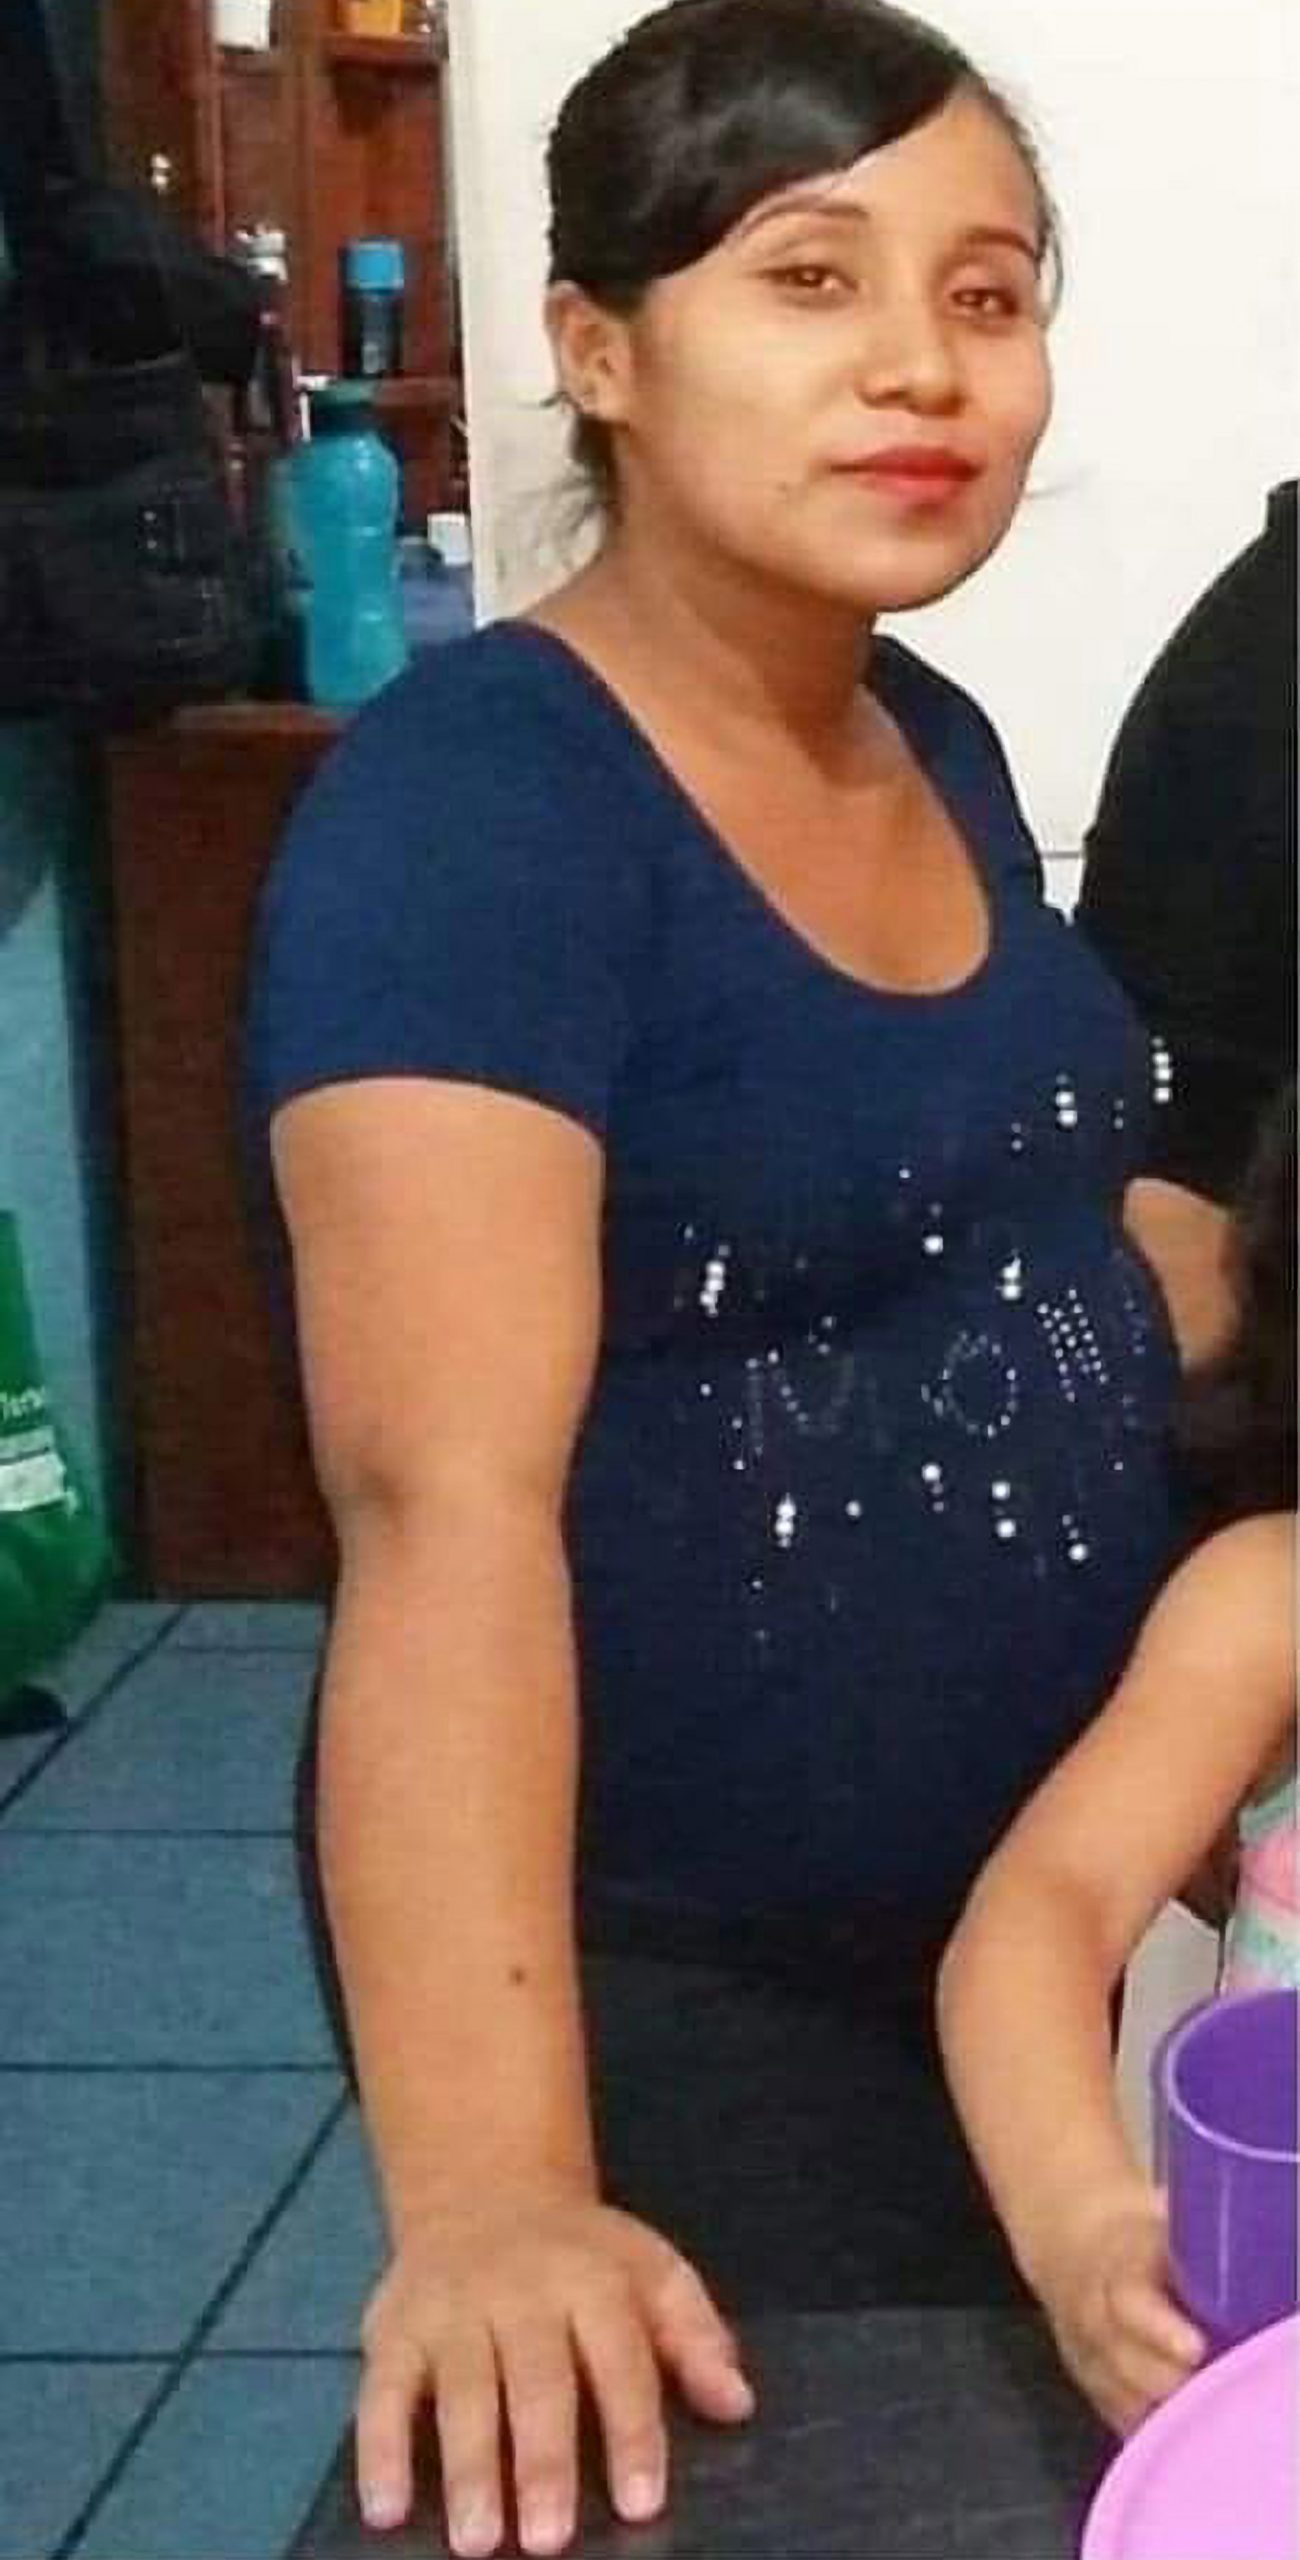 Read more about the article Pregnant Woman Killed After Baby Cut Out At Vet Surgery